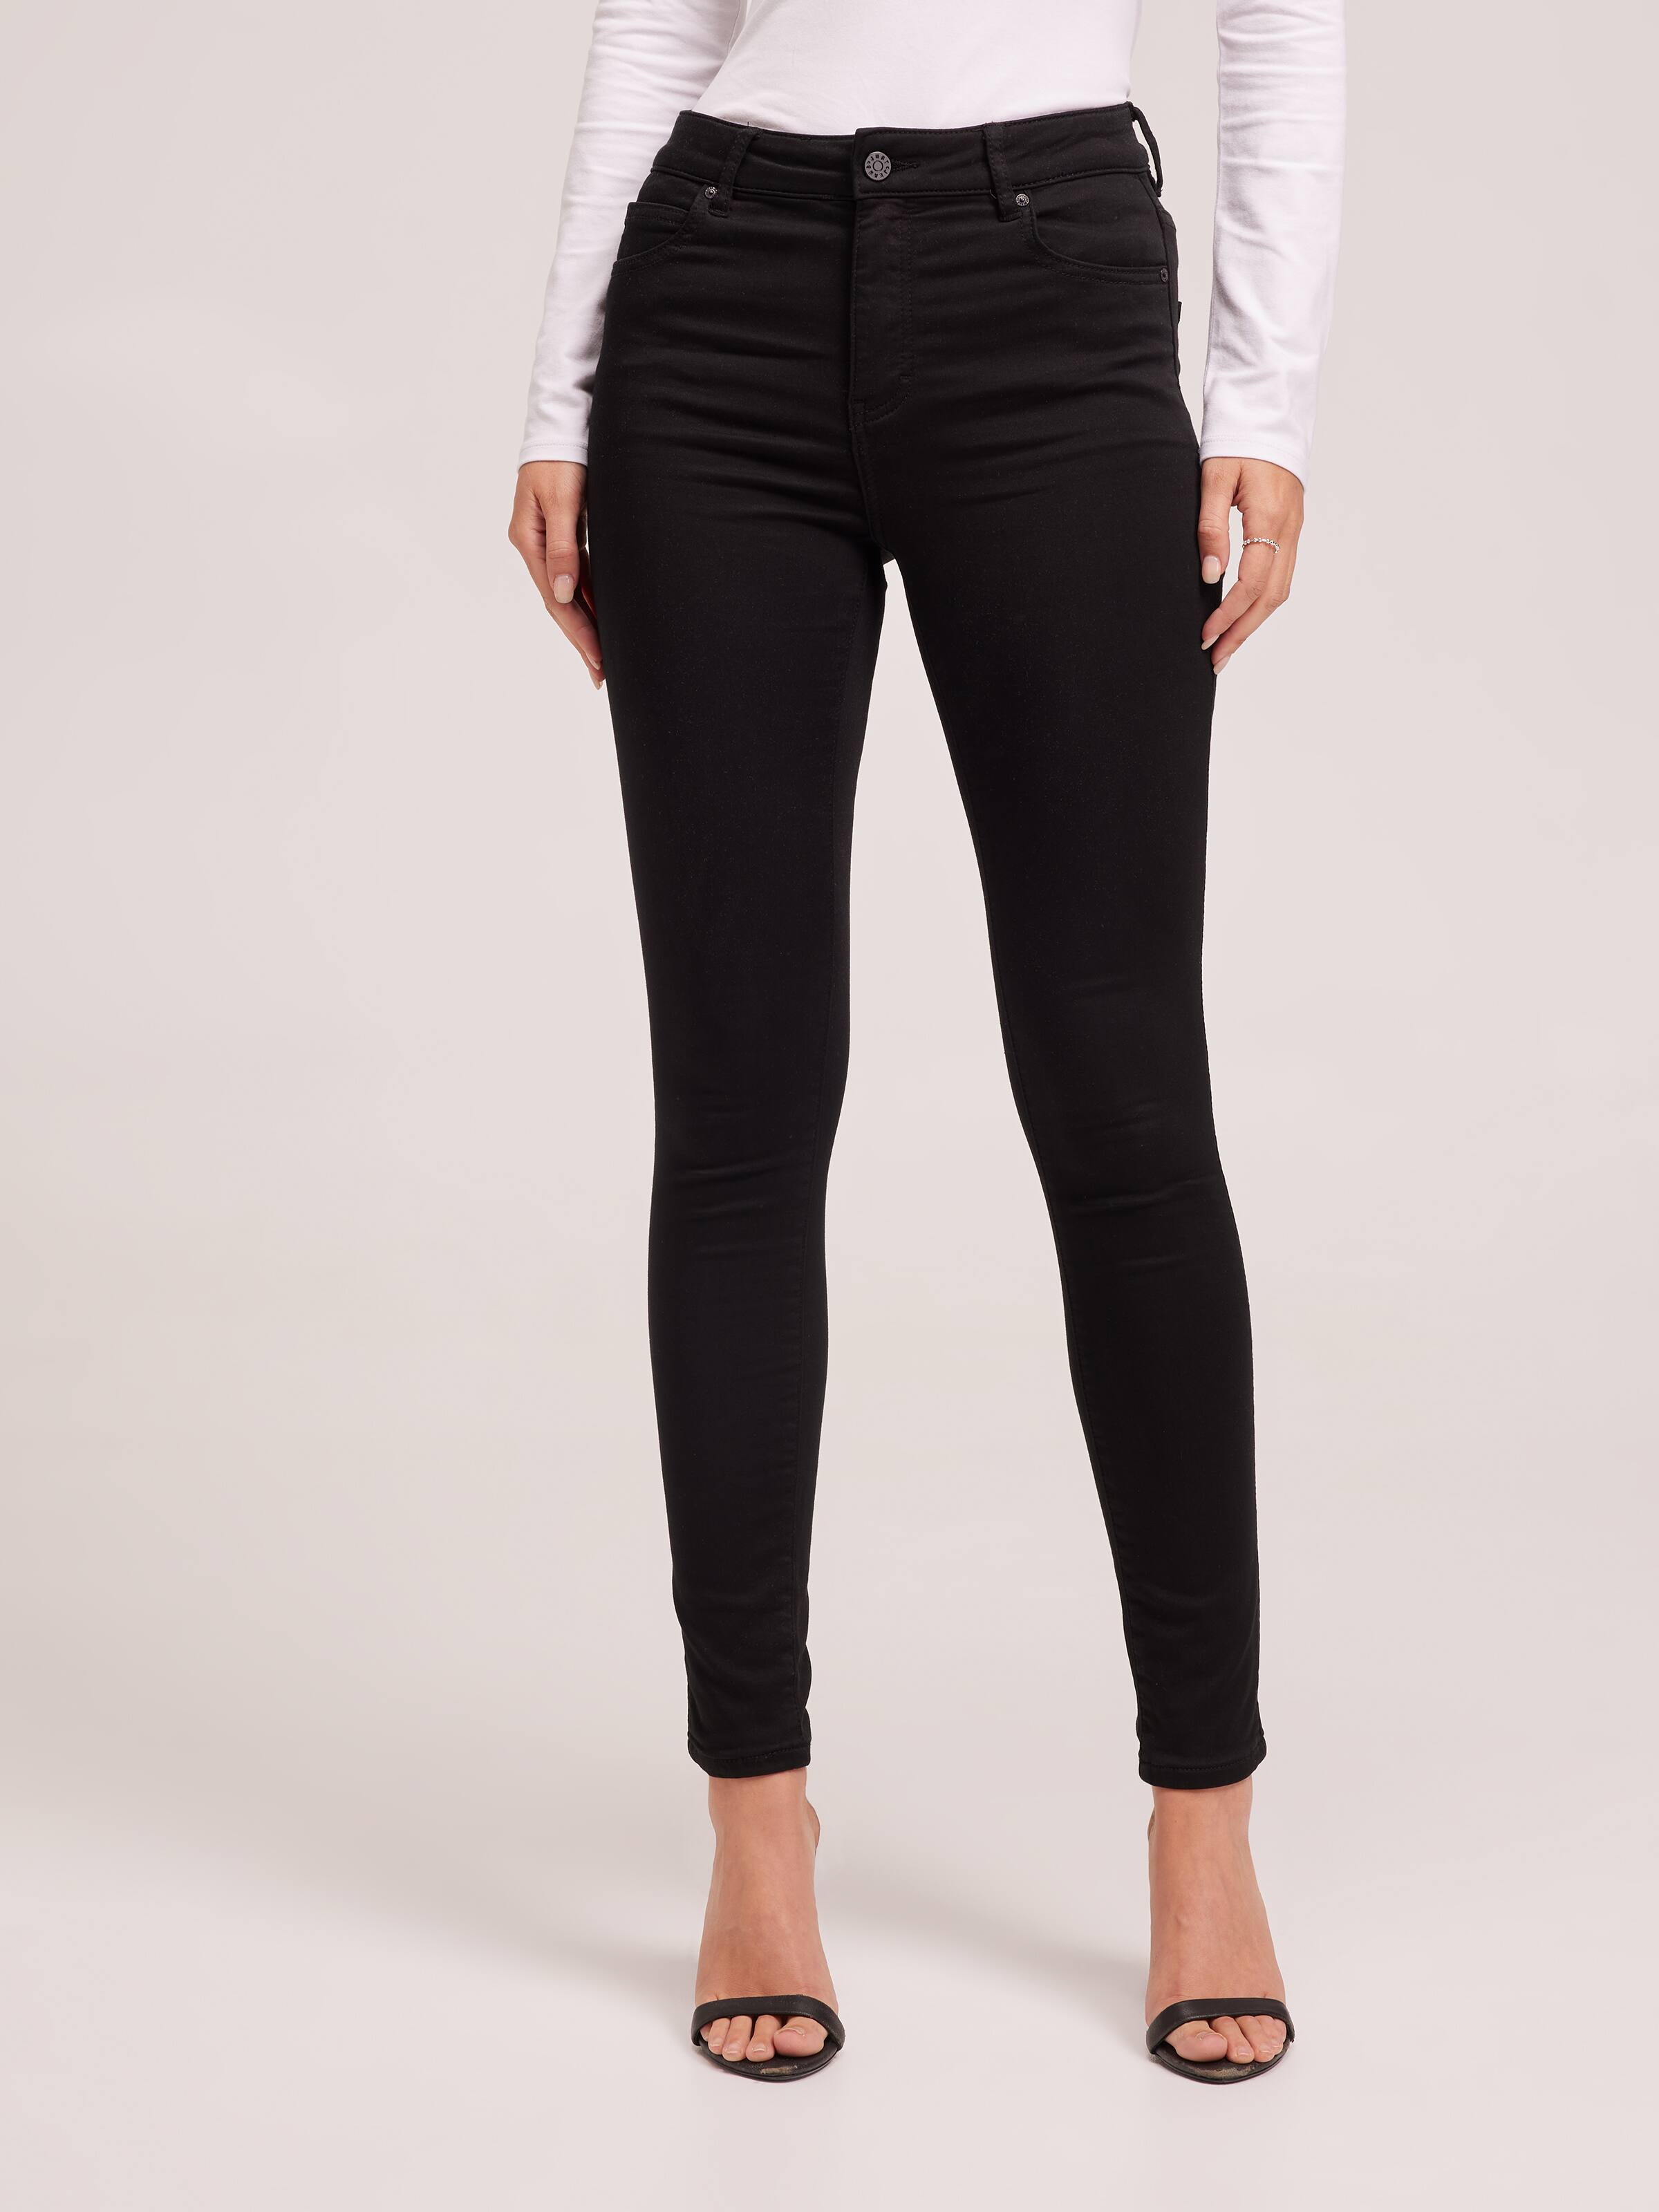 Black High Waisted Jeans In Ghana, Ladies Jeans